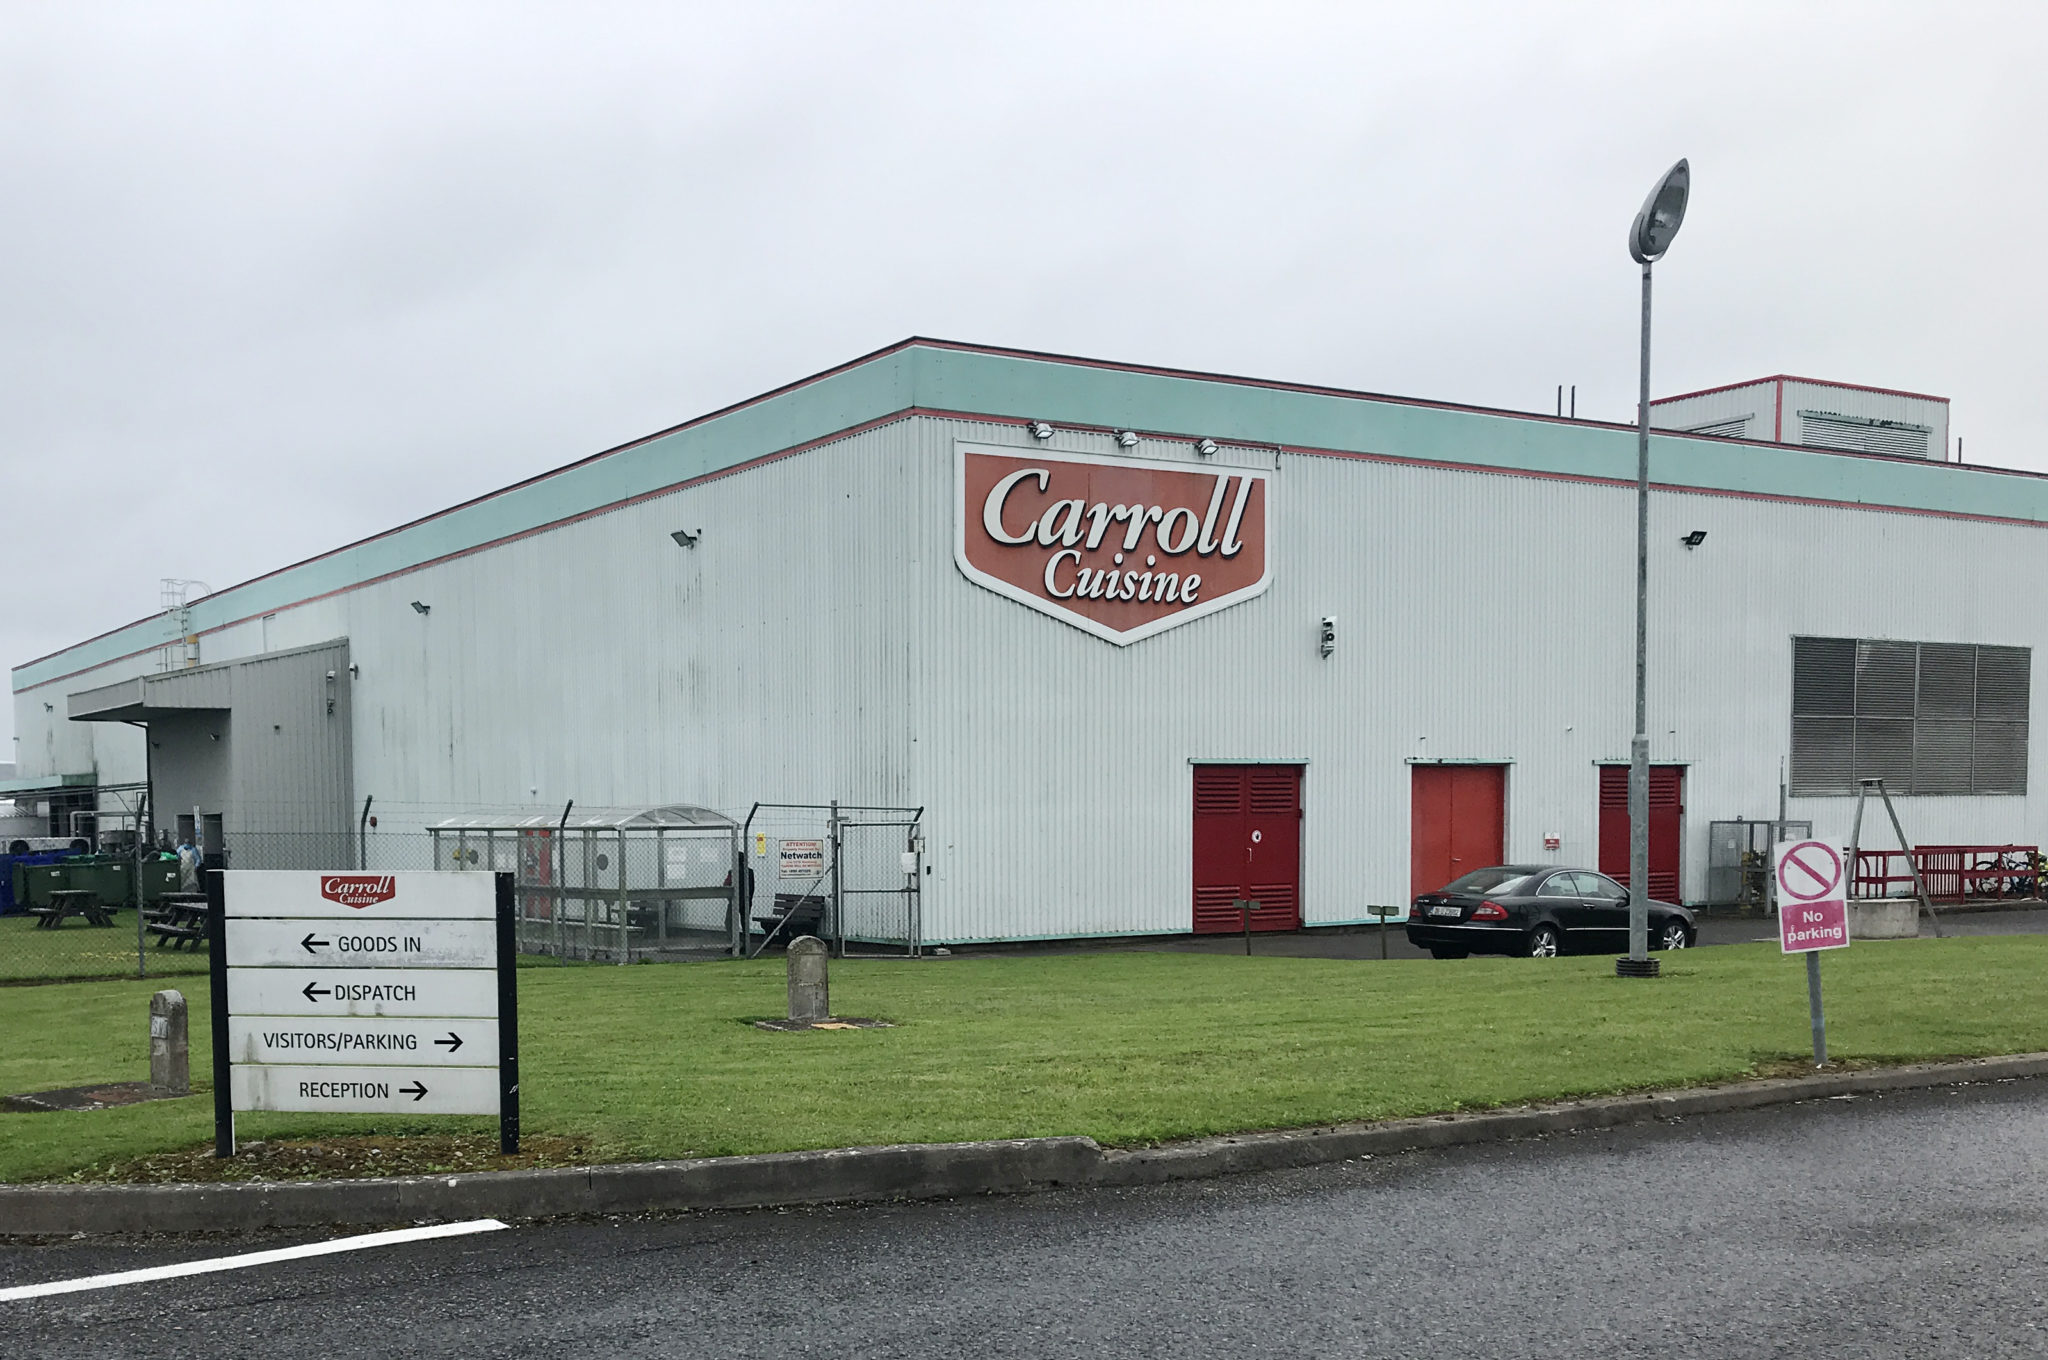 Carroll’s Cuisine meat plant in County Offaly